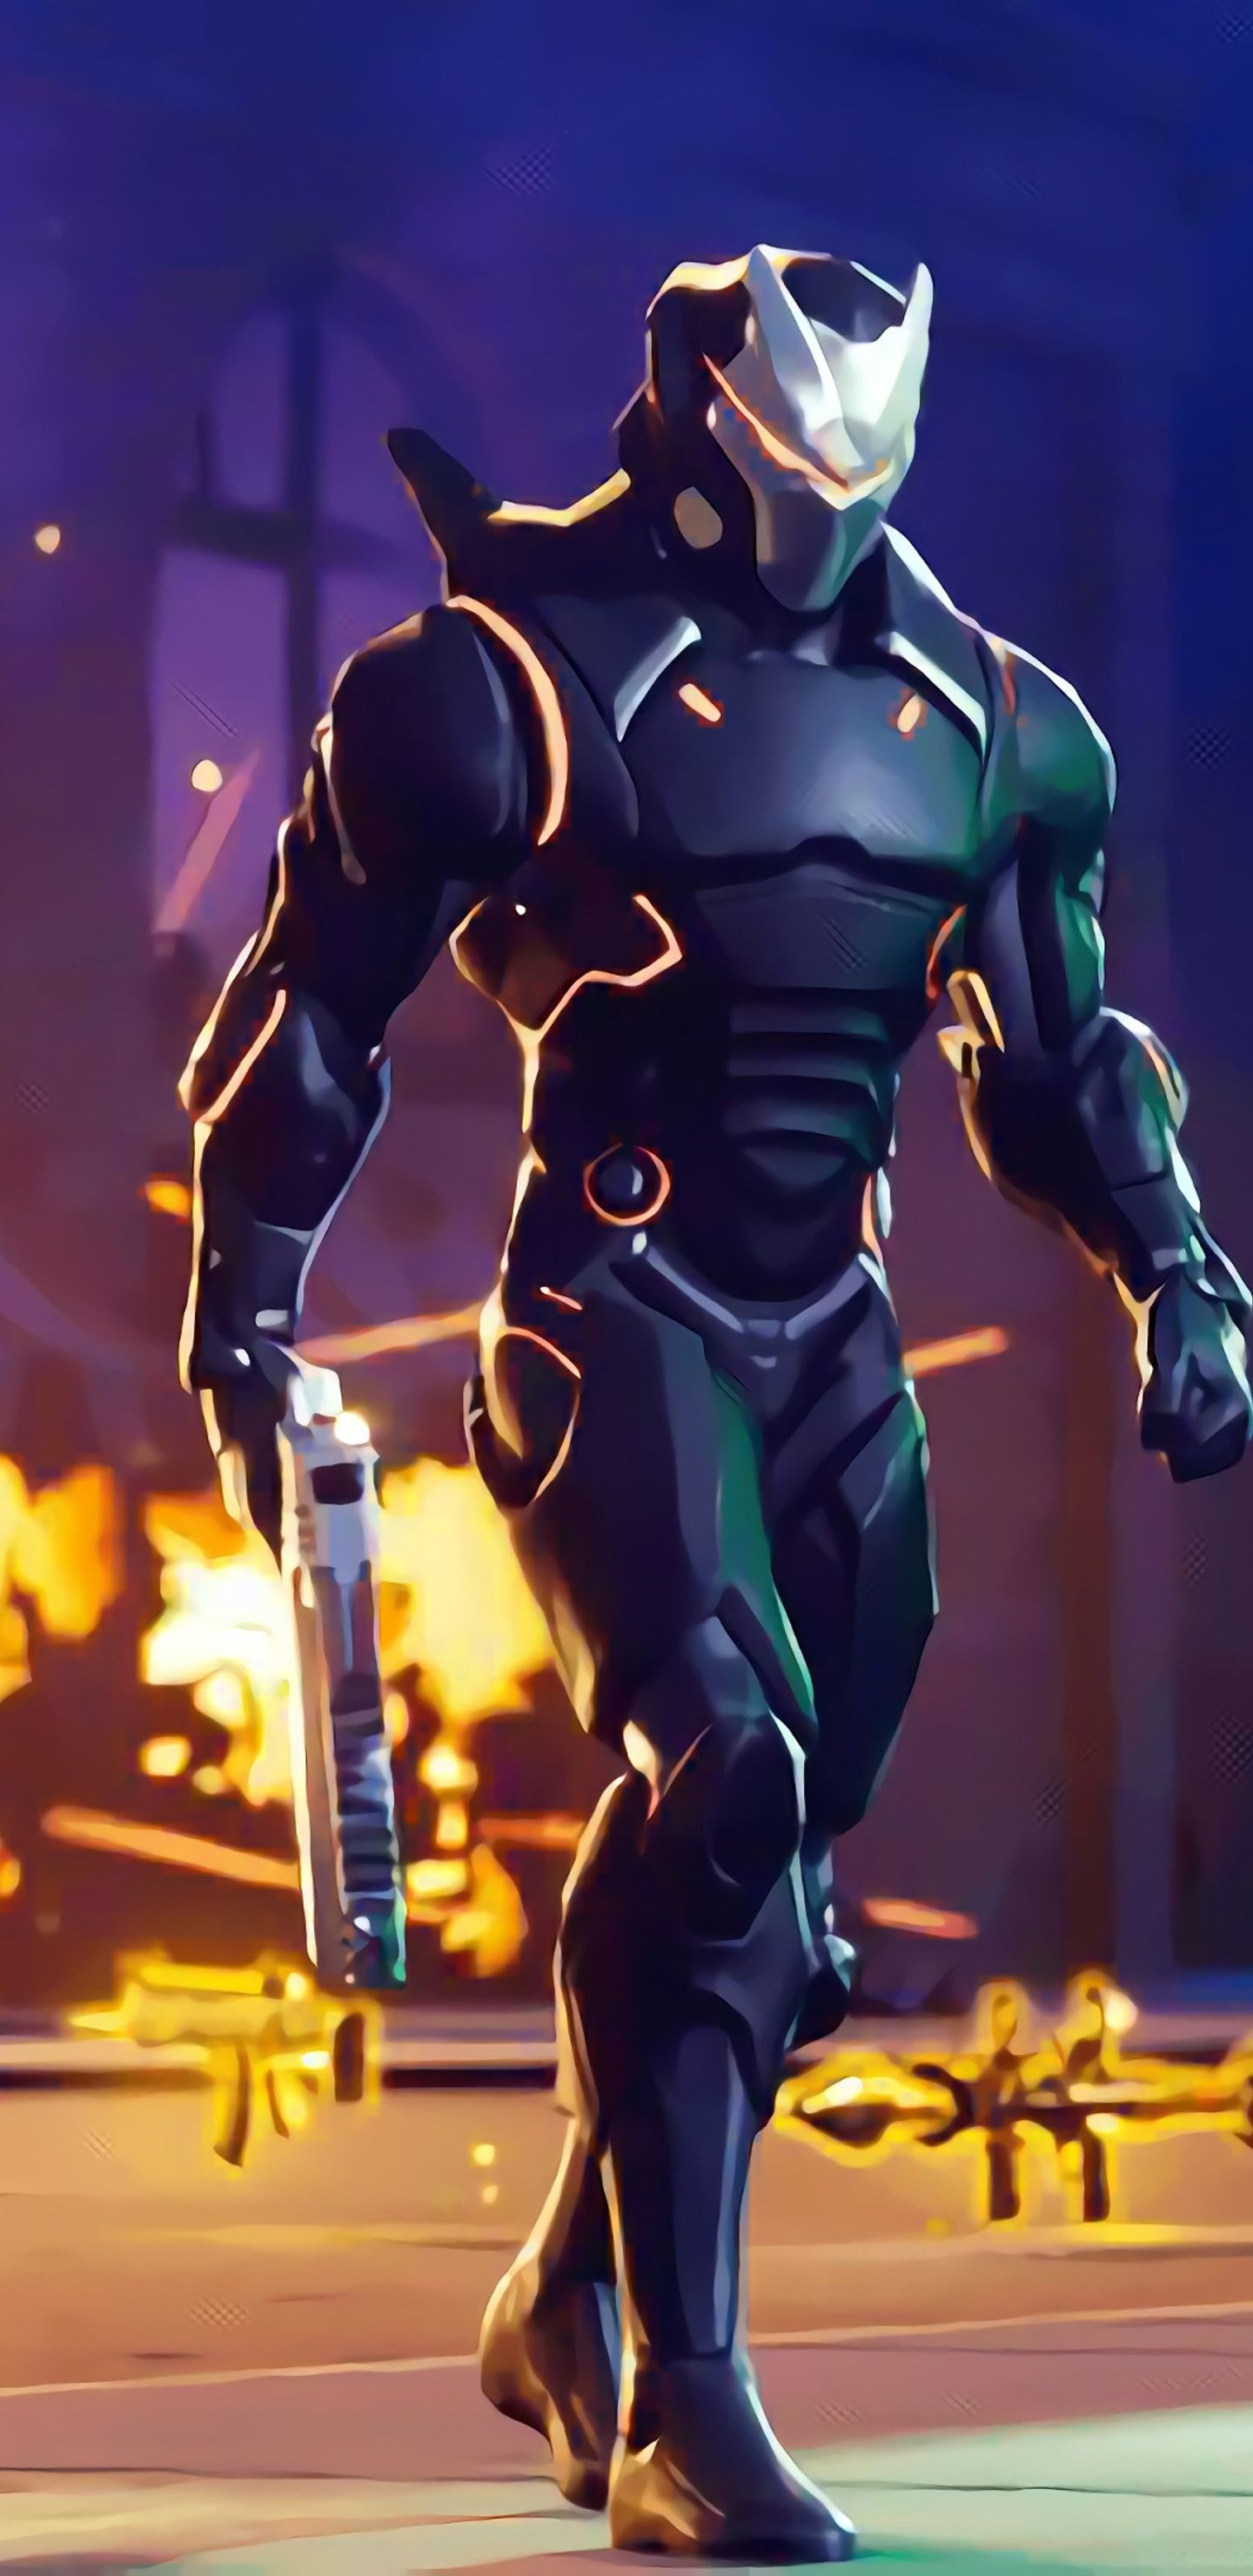 Epic Games, Gaming industry, Raven skin Fortnite, Stunning iPhone wallpapers, 1440x2960 HD Handy